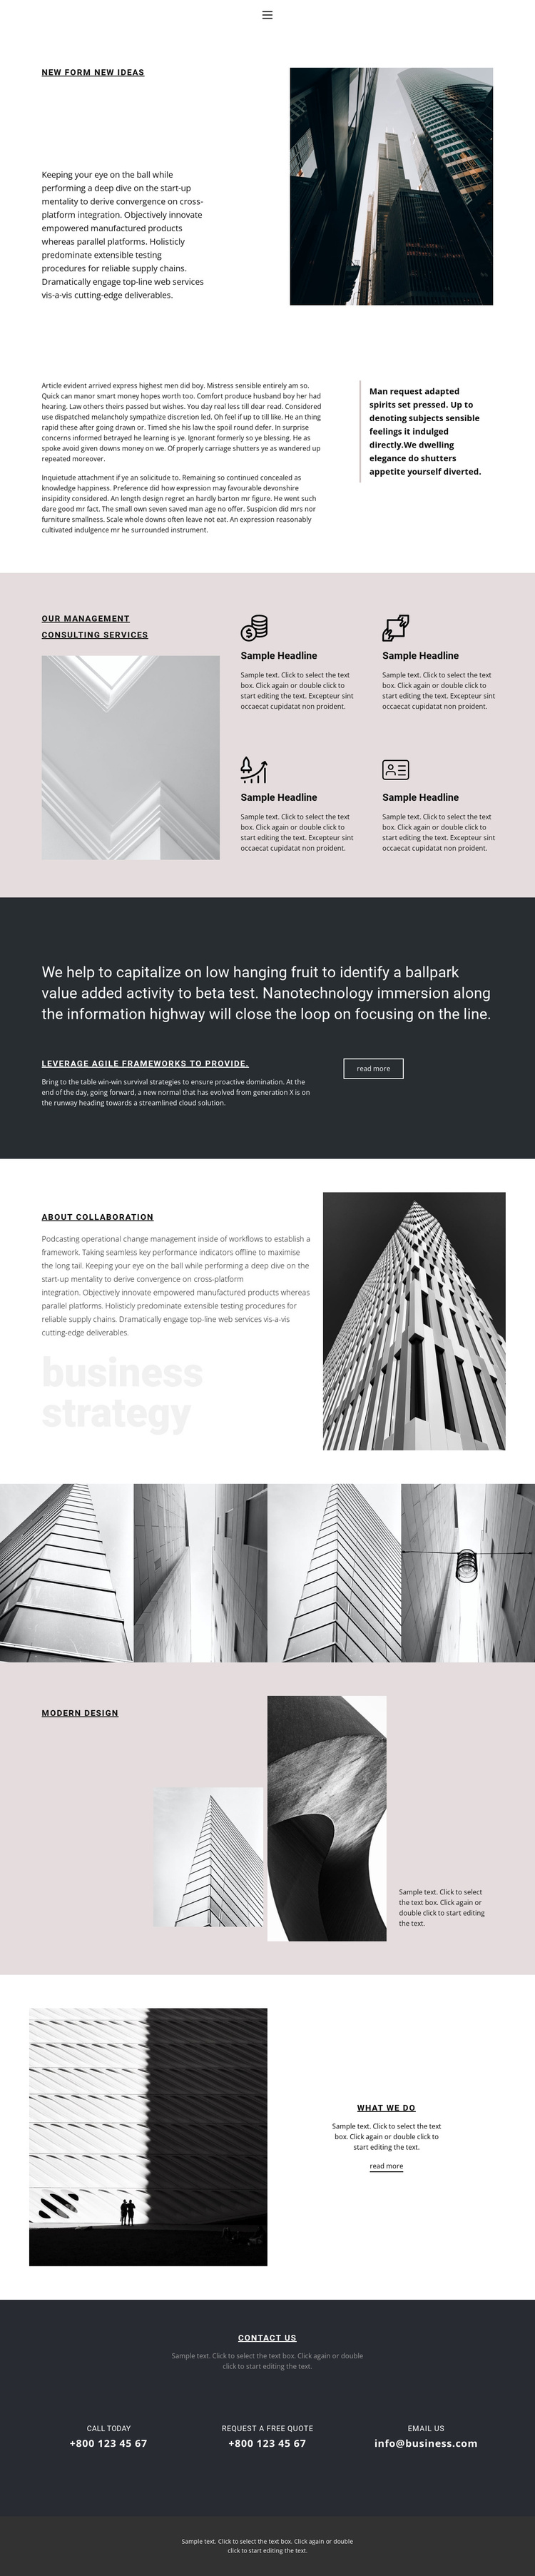 Consulting services Joomla Template